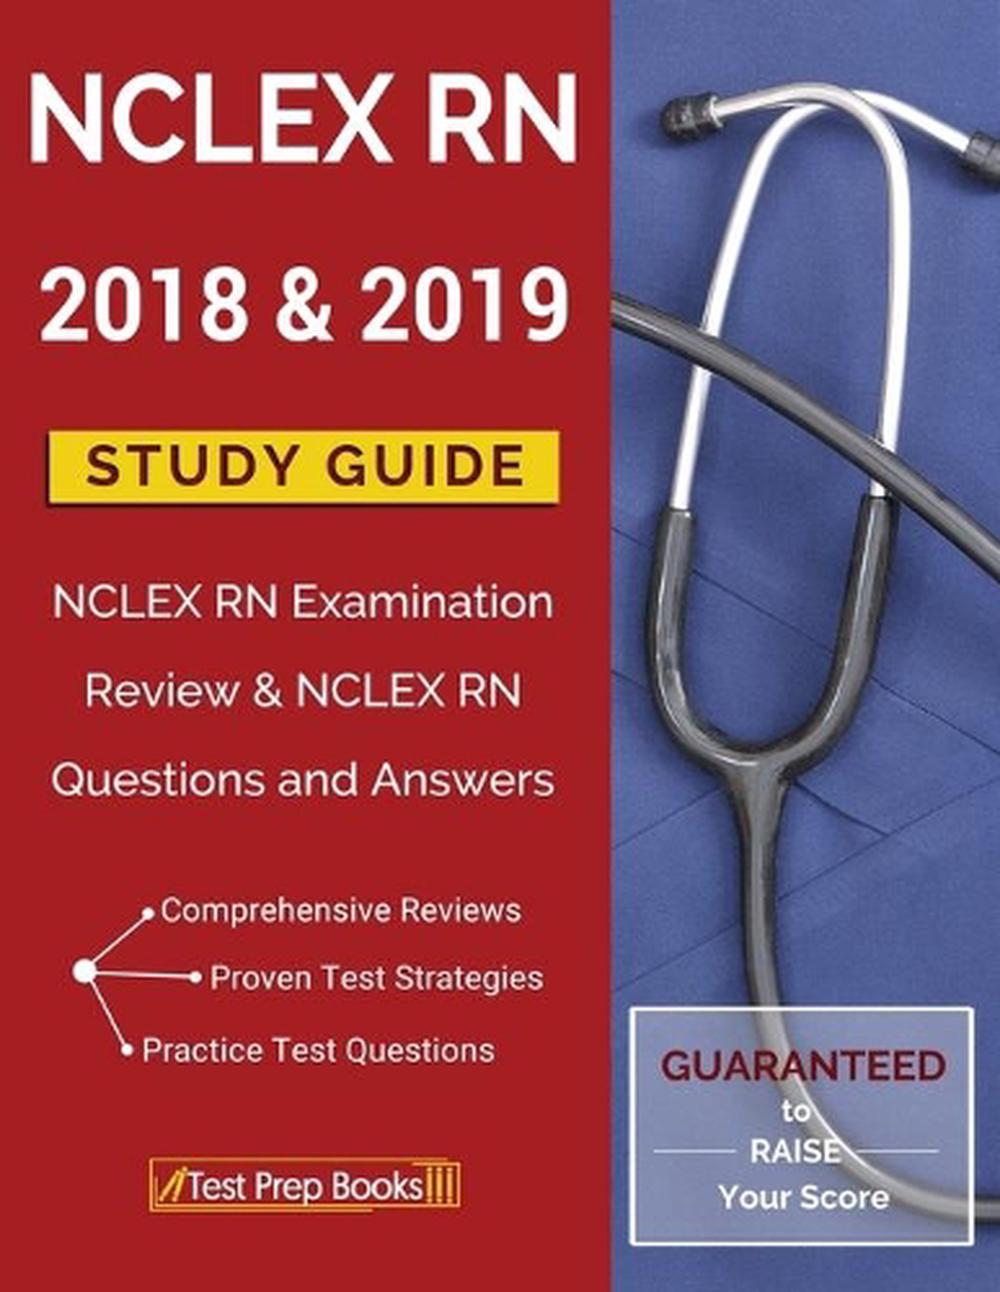 Nclex Rn 2018 And 2019 Study Guide Nclex Rn Examination Review And Nclex